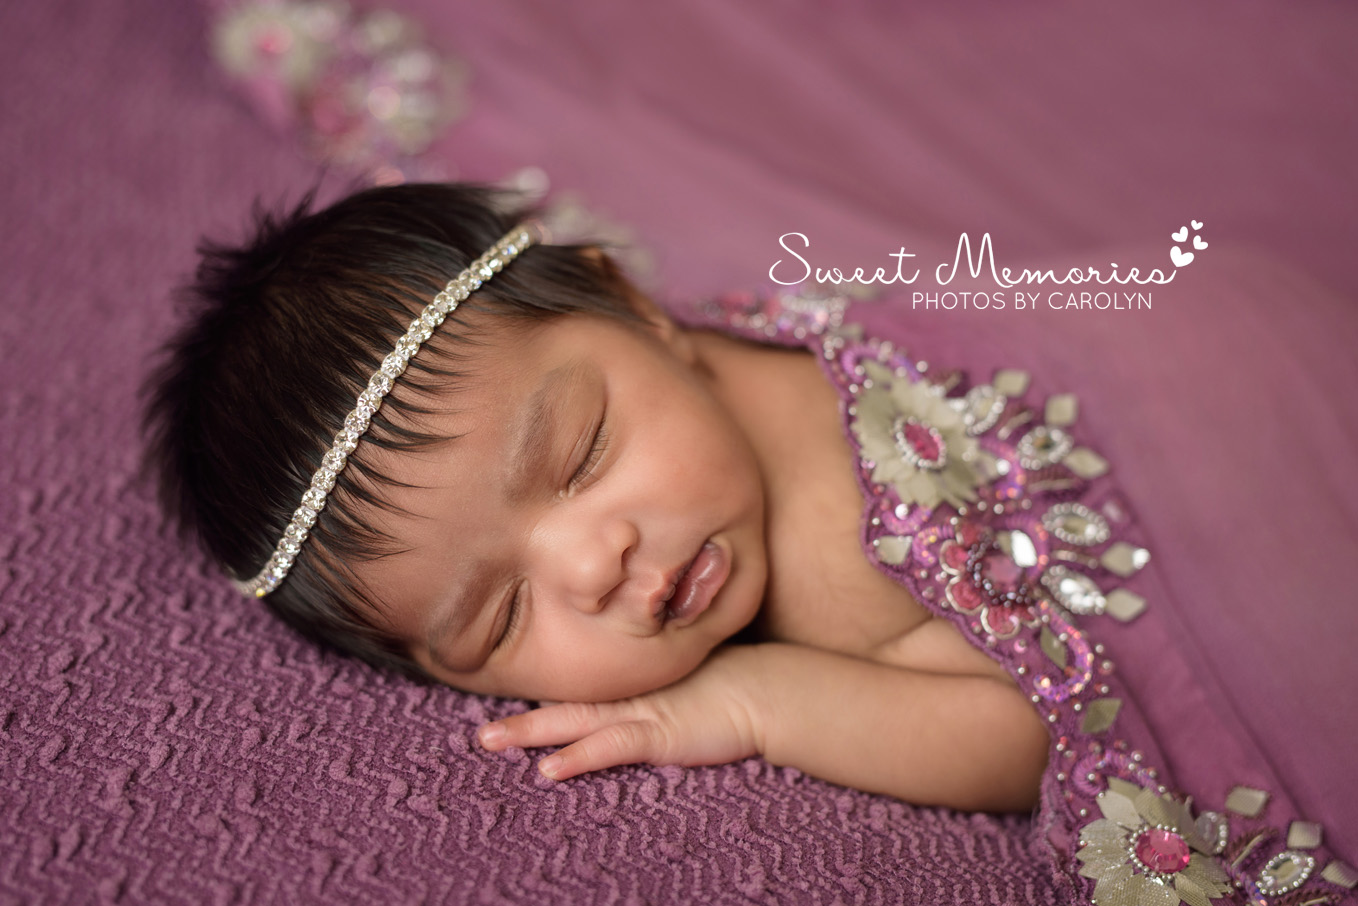 Sweet Memories Photos by Carolyn | Newtown PA | Bucks County Montgomery County Newborn Infant Baby Photographer | Indian newborn baby girl with scarf